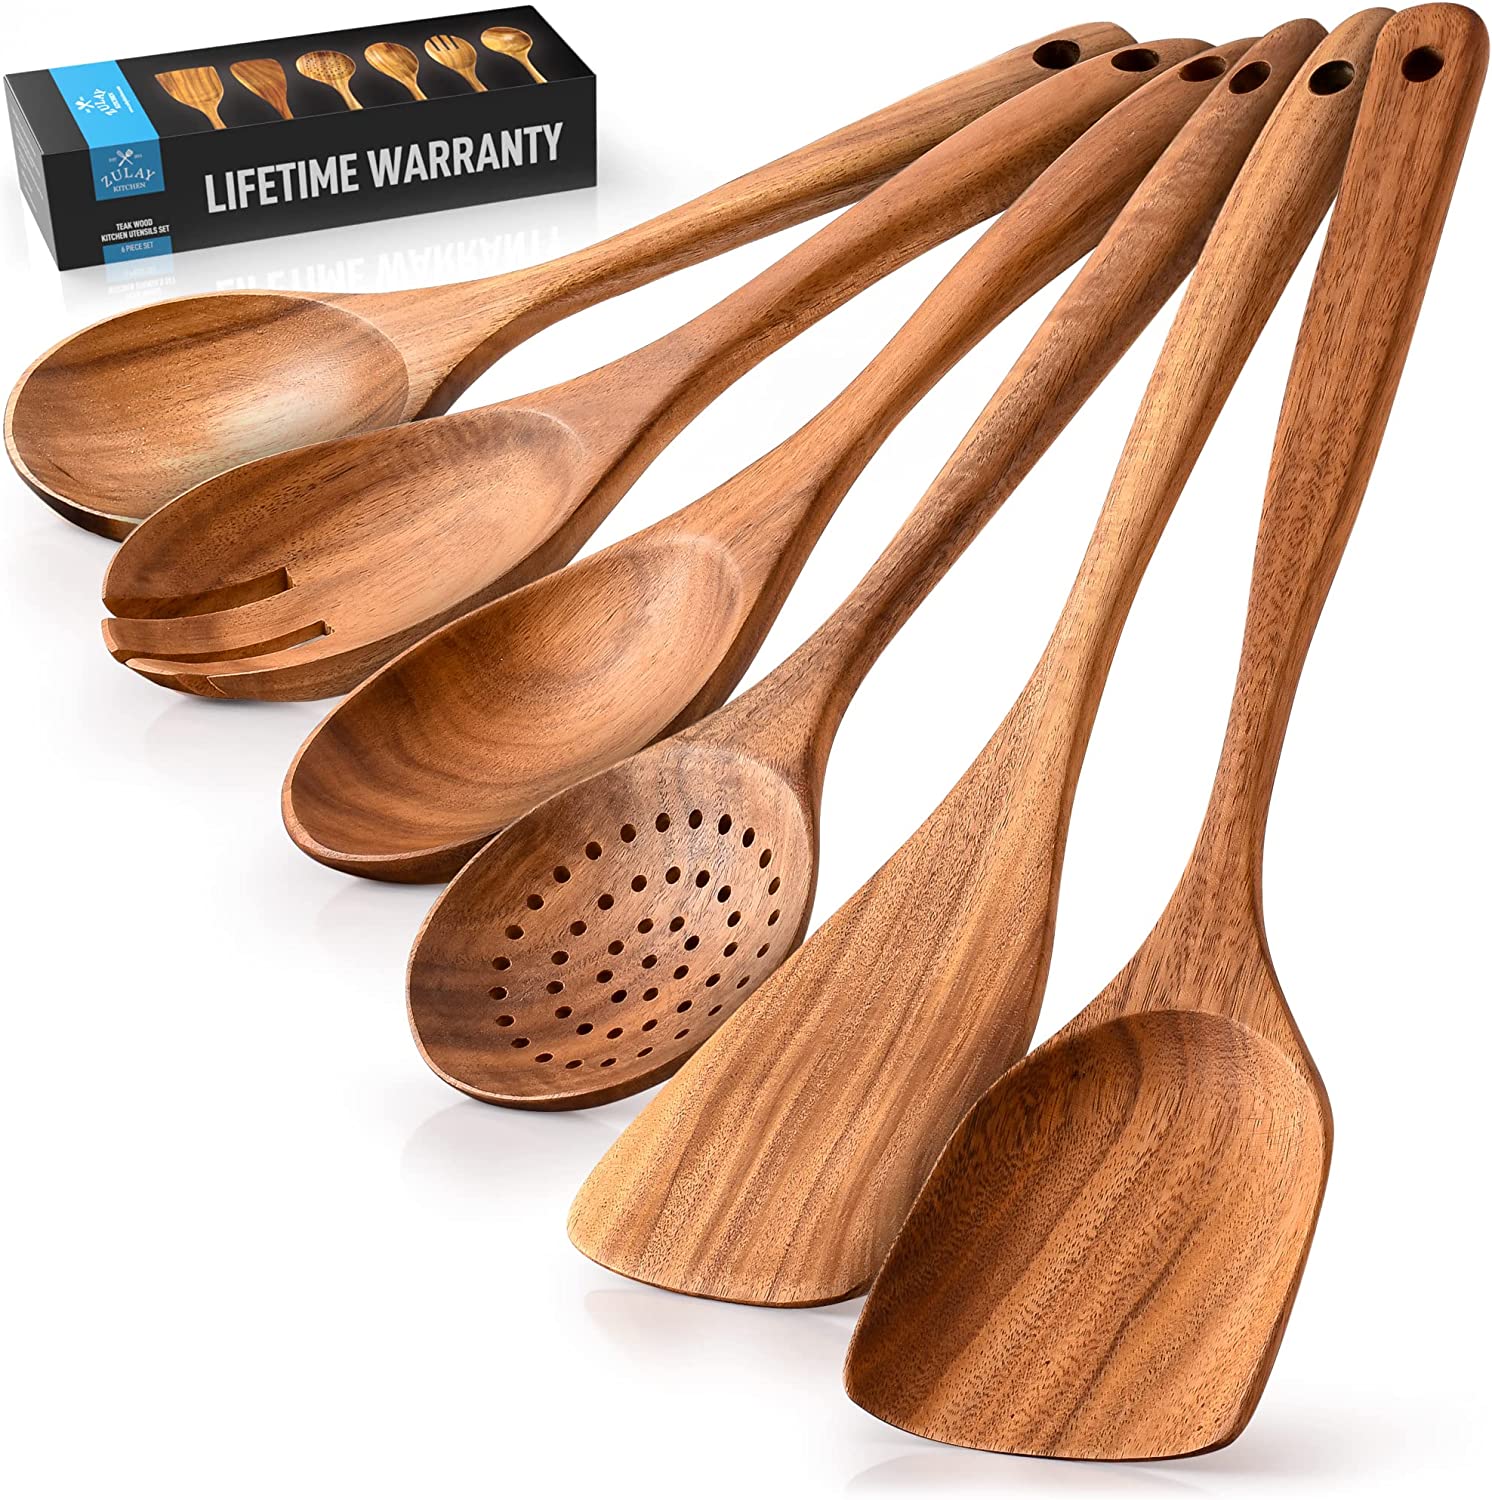 Zulay Kitchen Easy Clean Organic Wooden Spoon Spoon Set 